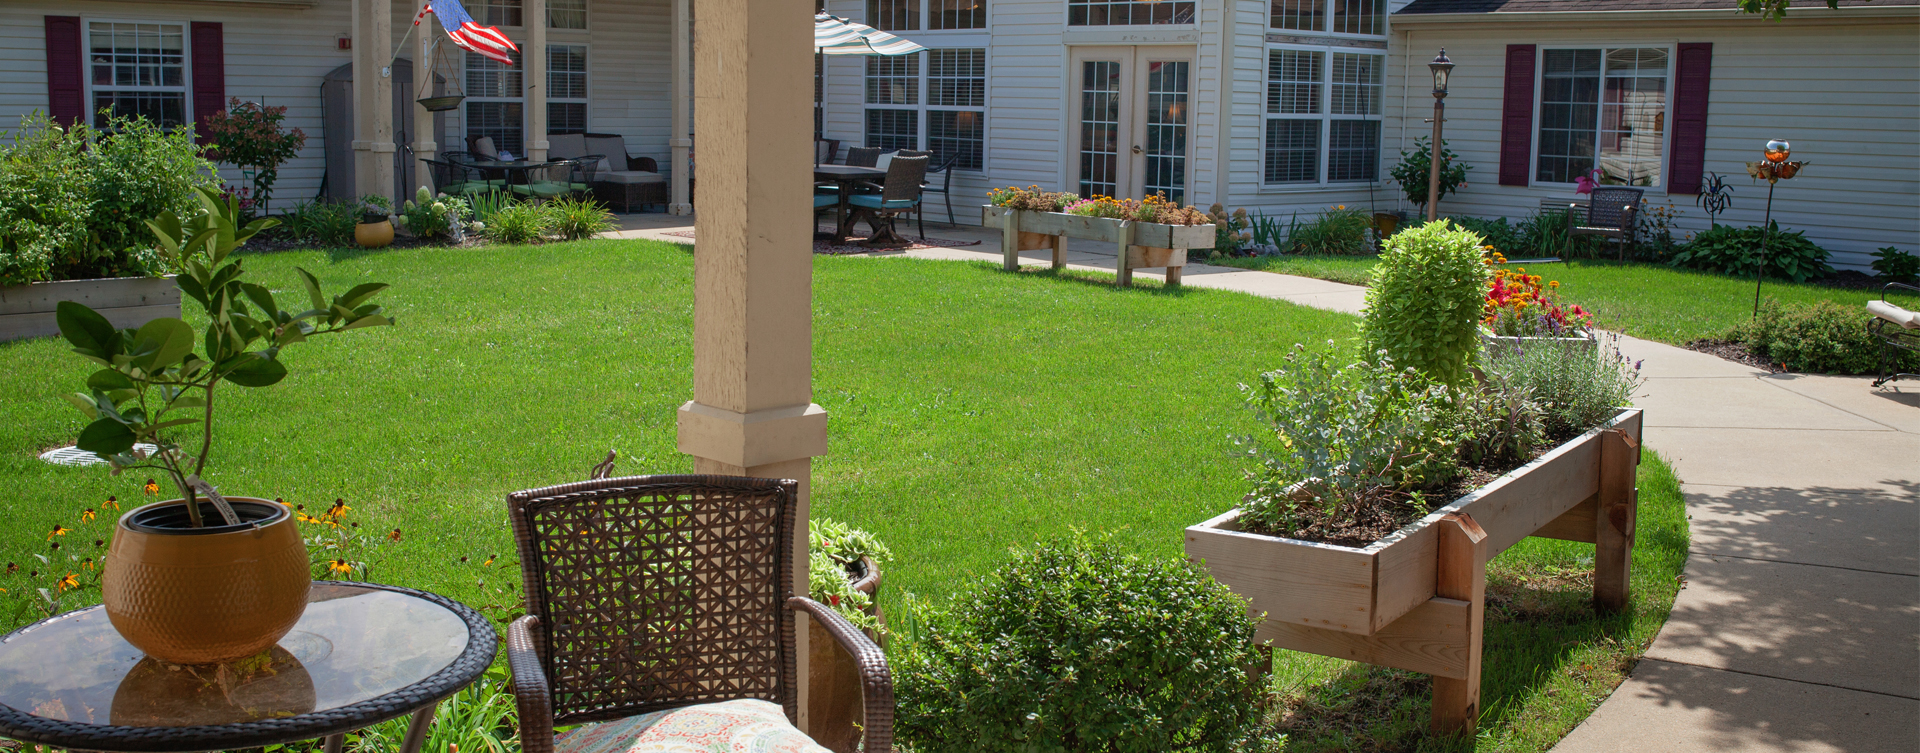 Enjoy the outdoors in a whole new light by stepping into our secure courtyard at Bickford of Marion